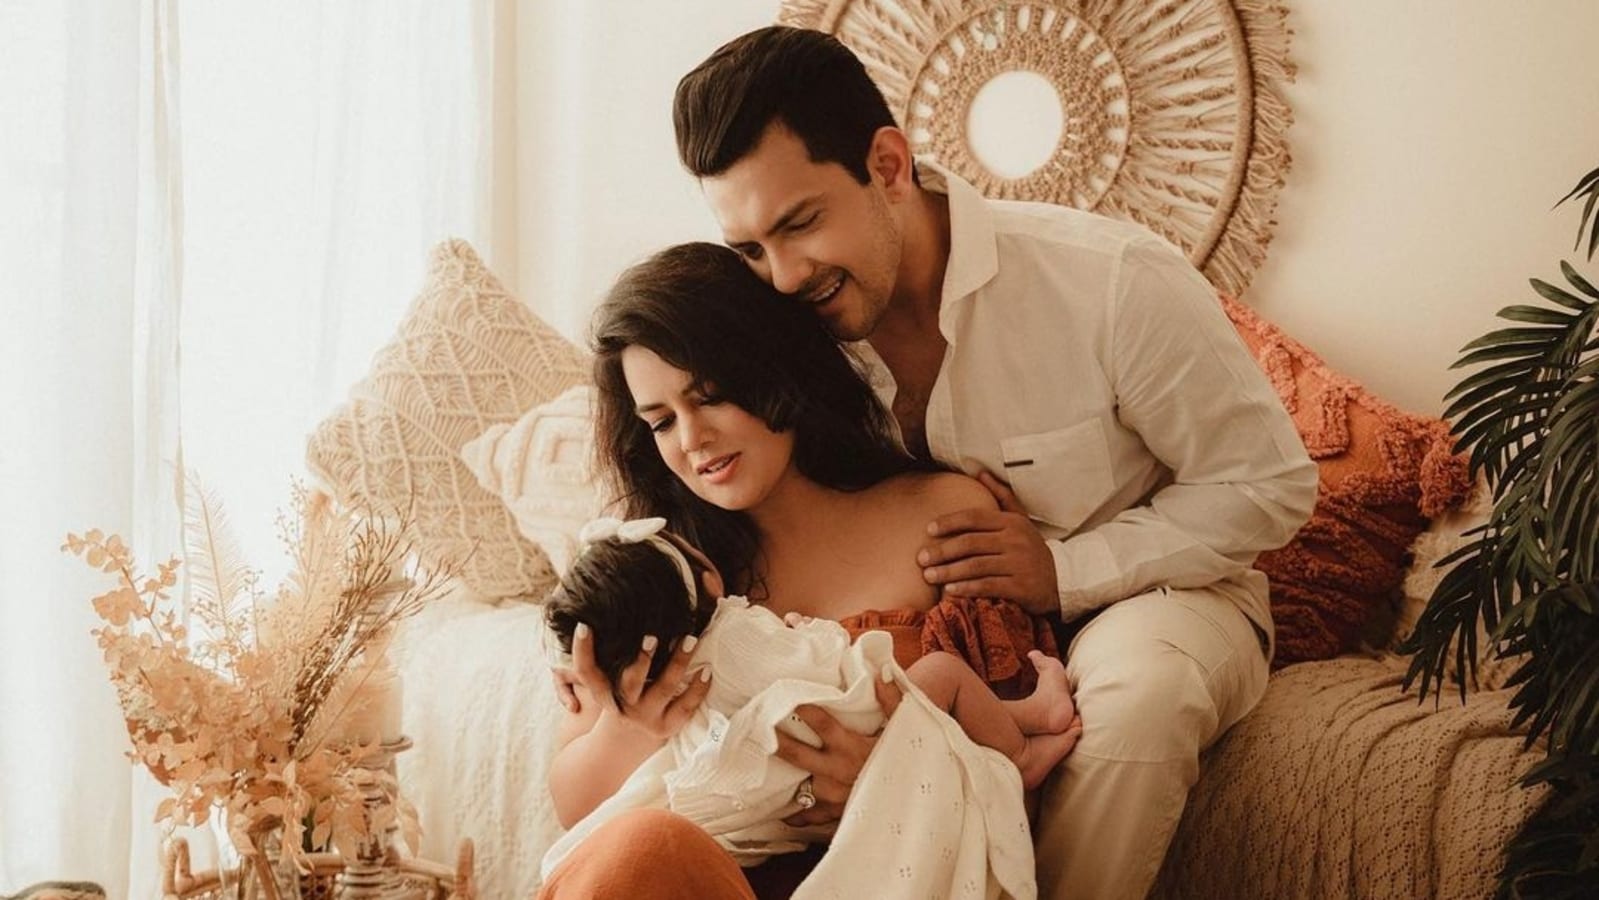 Aditya Narayan posts first family pic with wife Shweta Agarwal and daughter Tvisha: 'Our little bundle of joy'